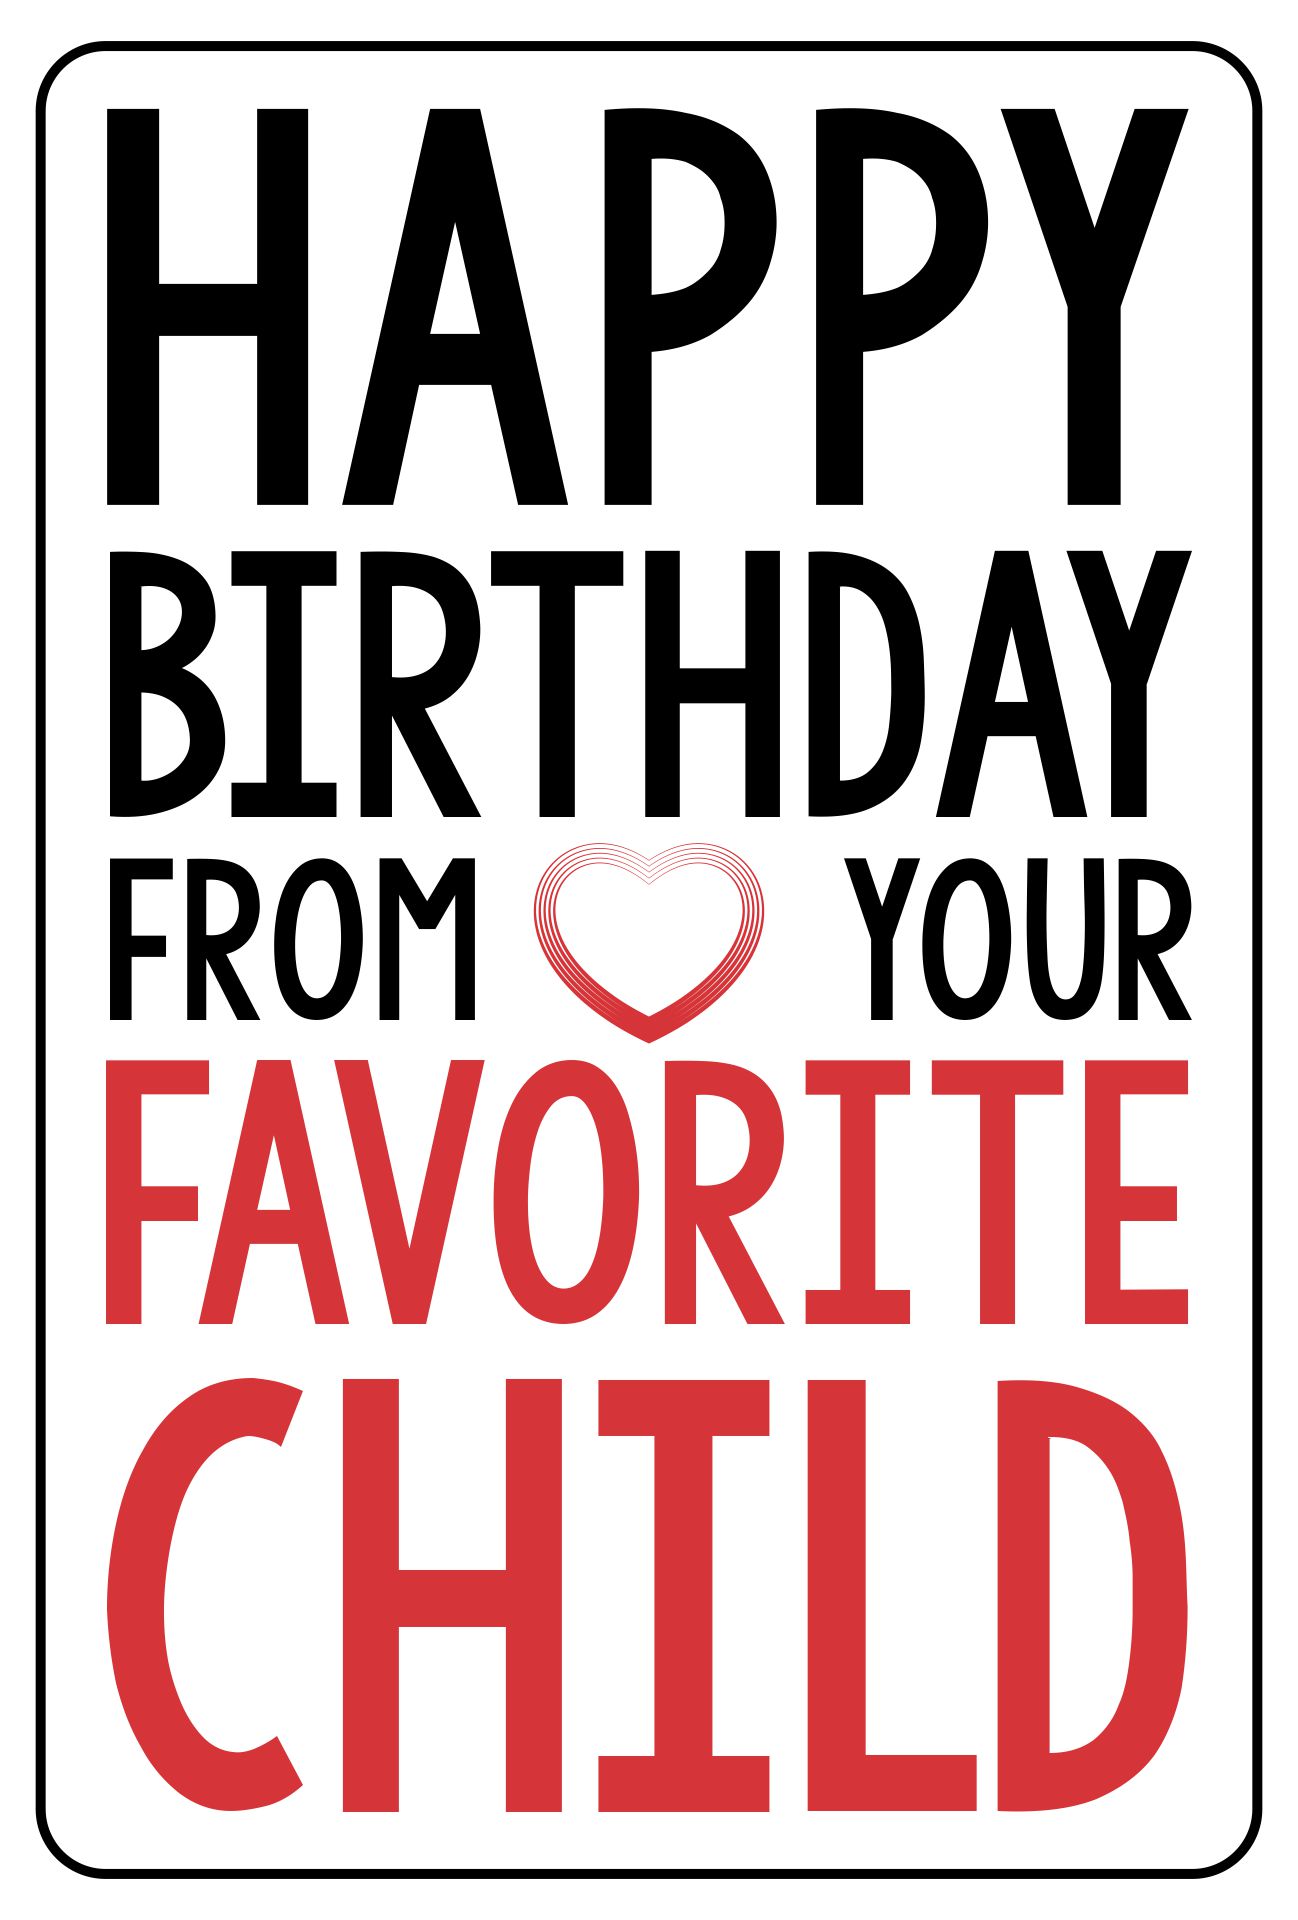 Printable Birthday Cards For Mom Funny